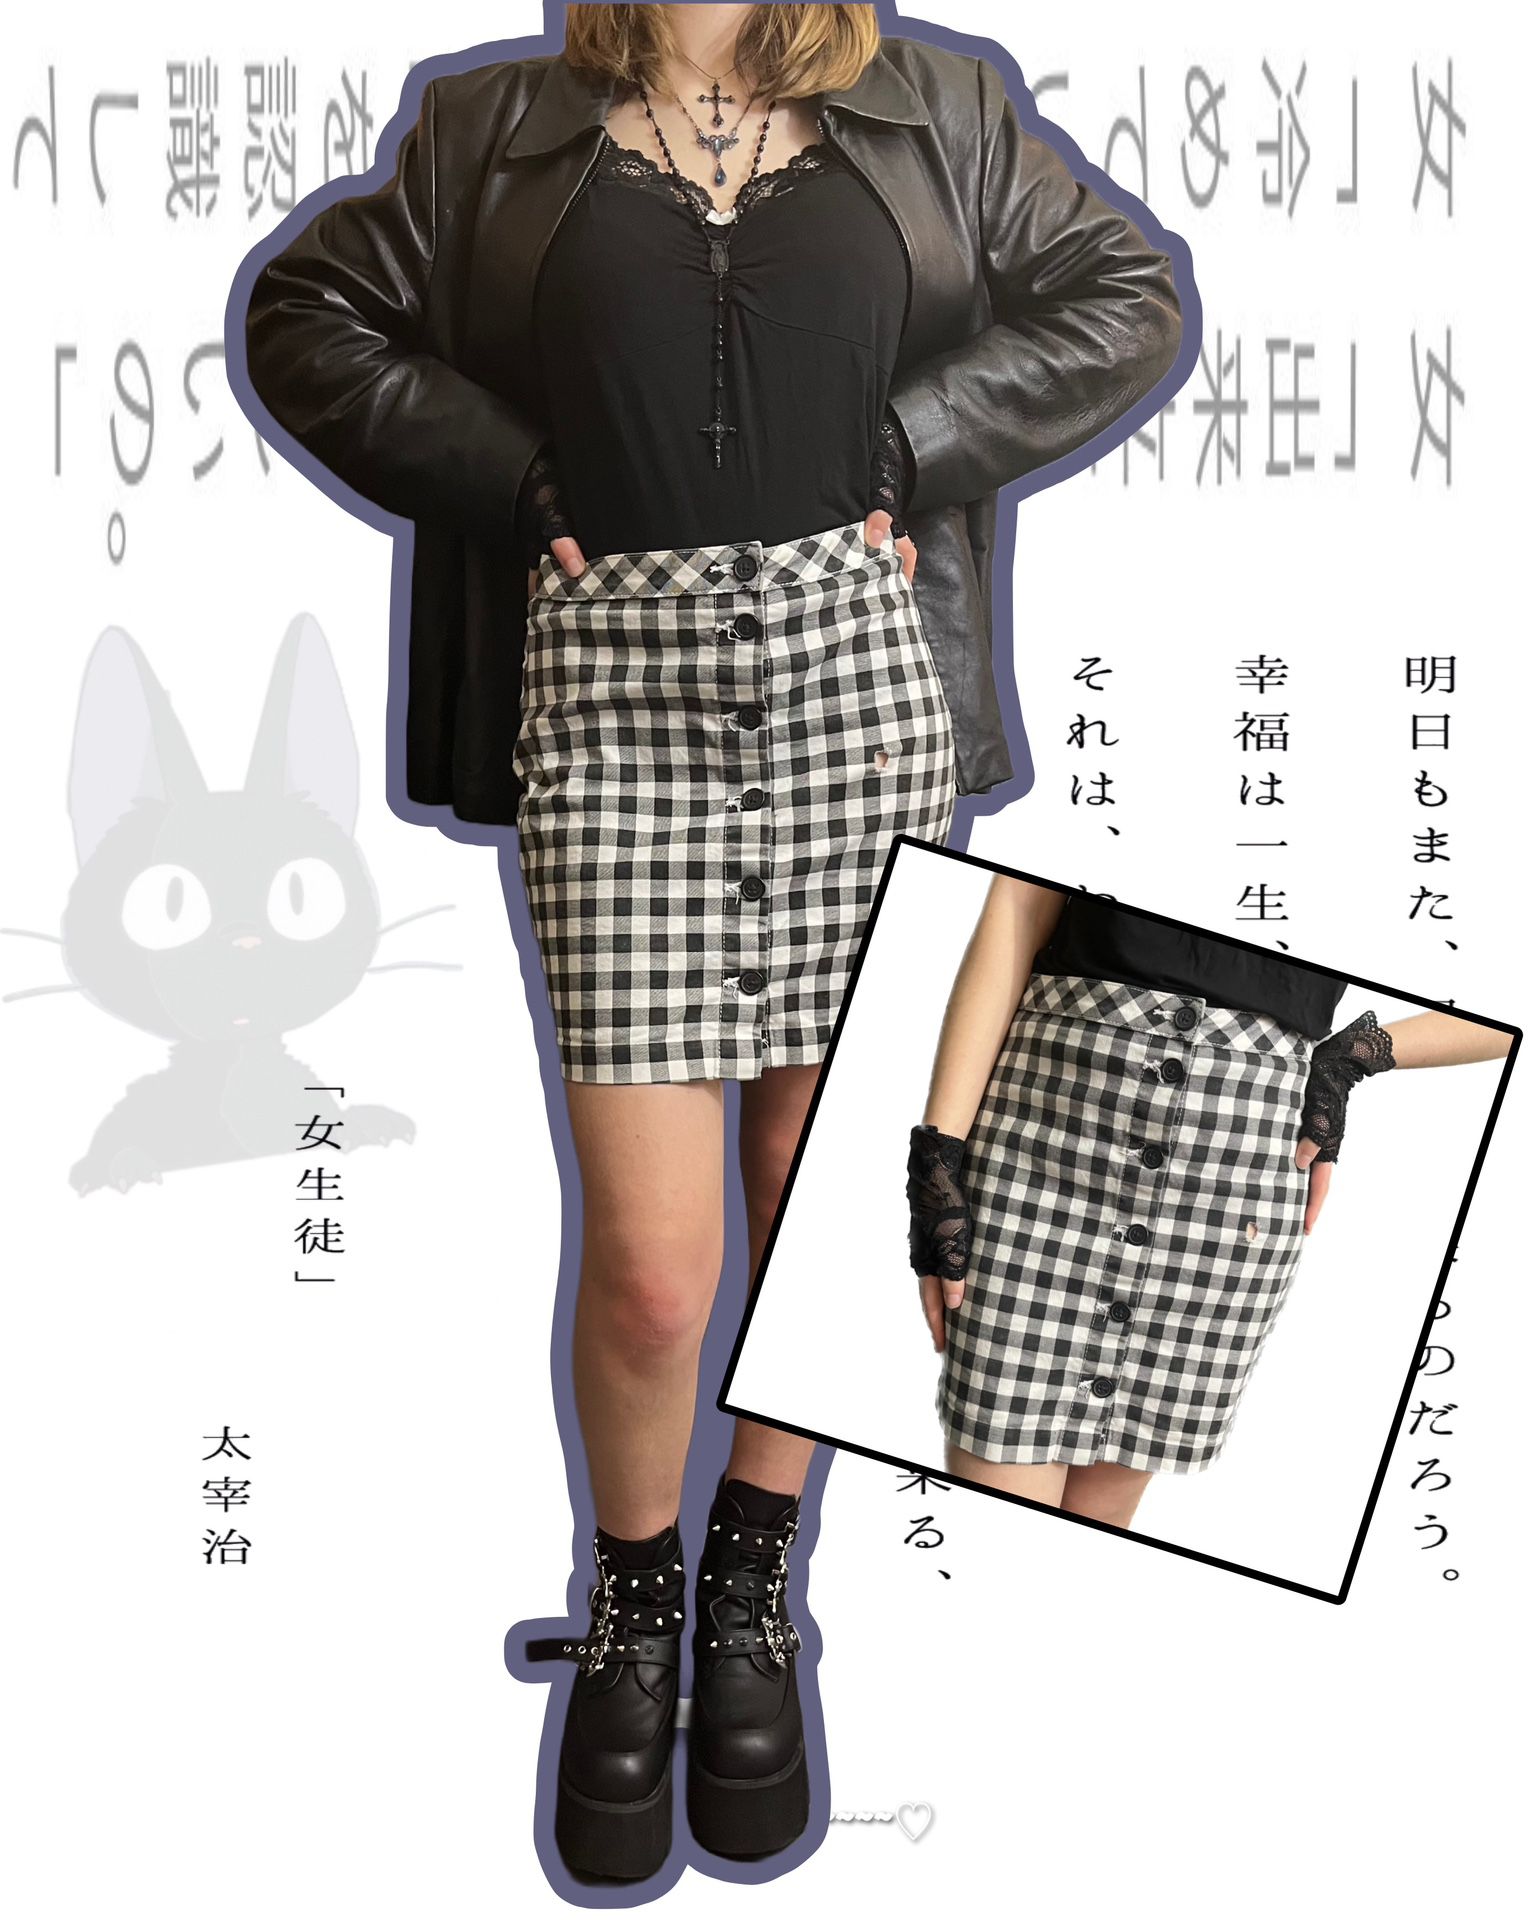 Divided Black and White Plaid Distressed Pencil Skirt